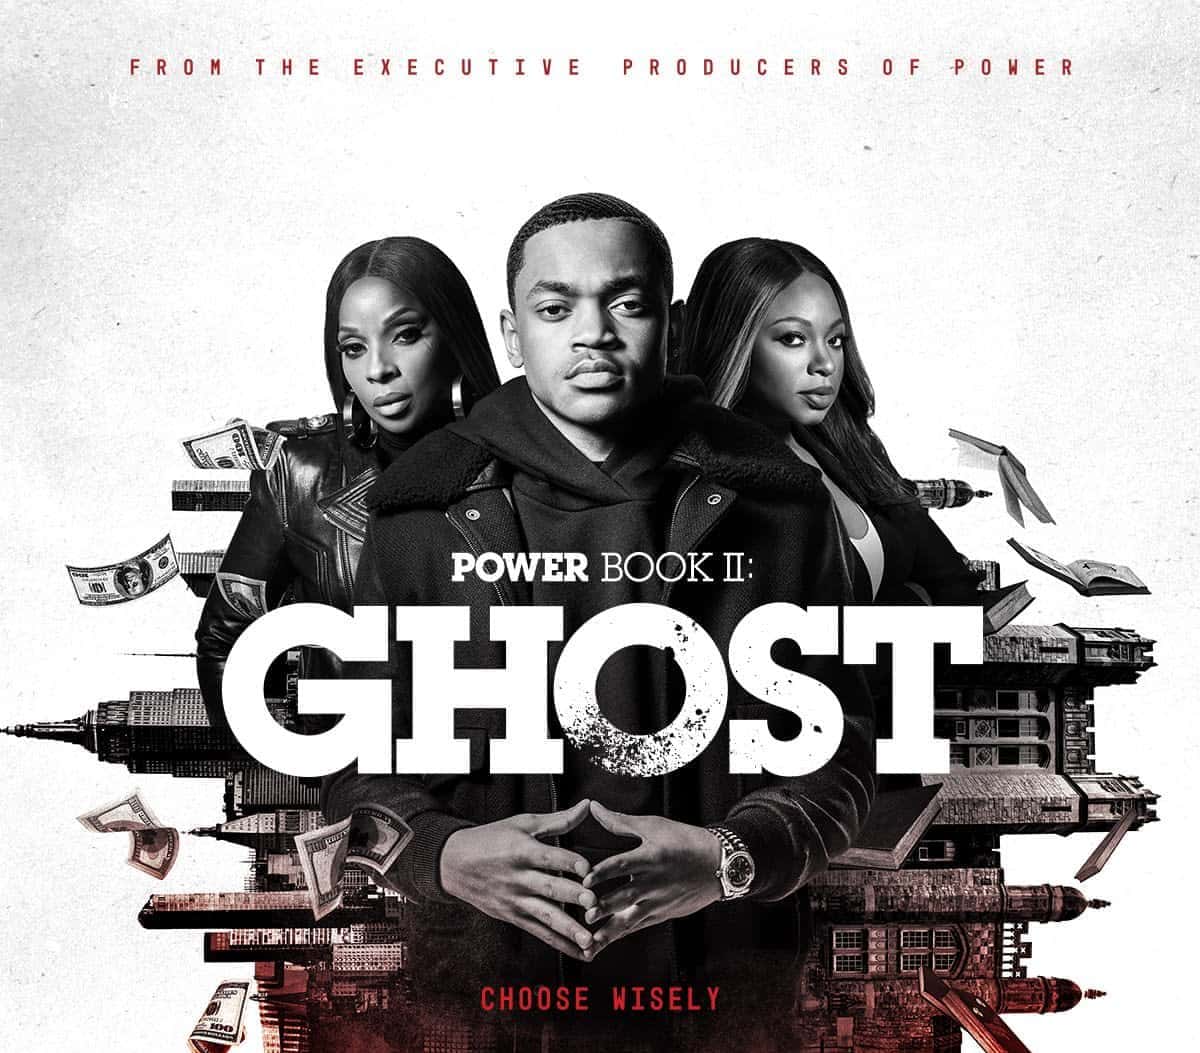 Power Book II: Ghost – Fashion Bomb Daily